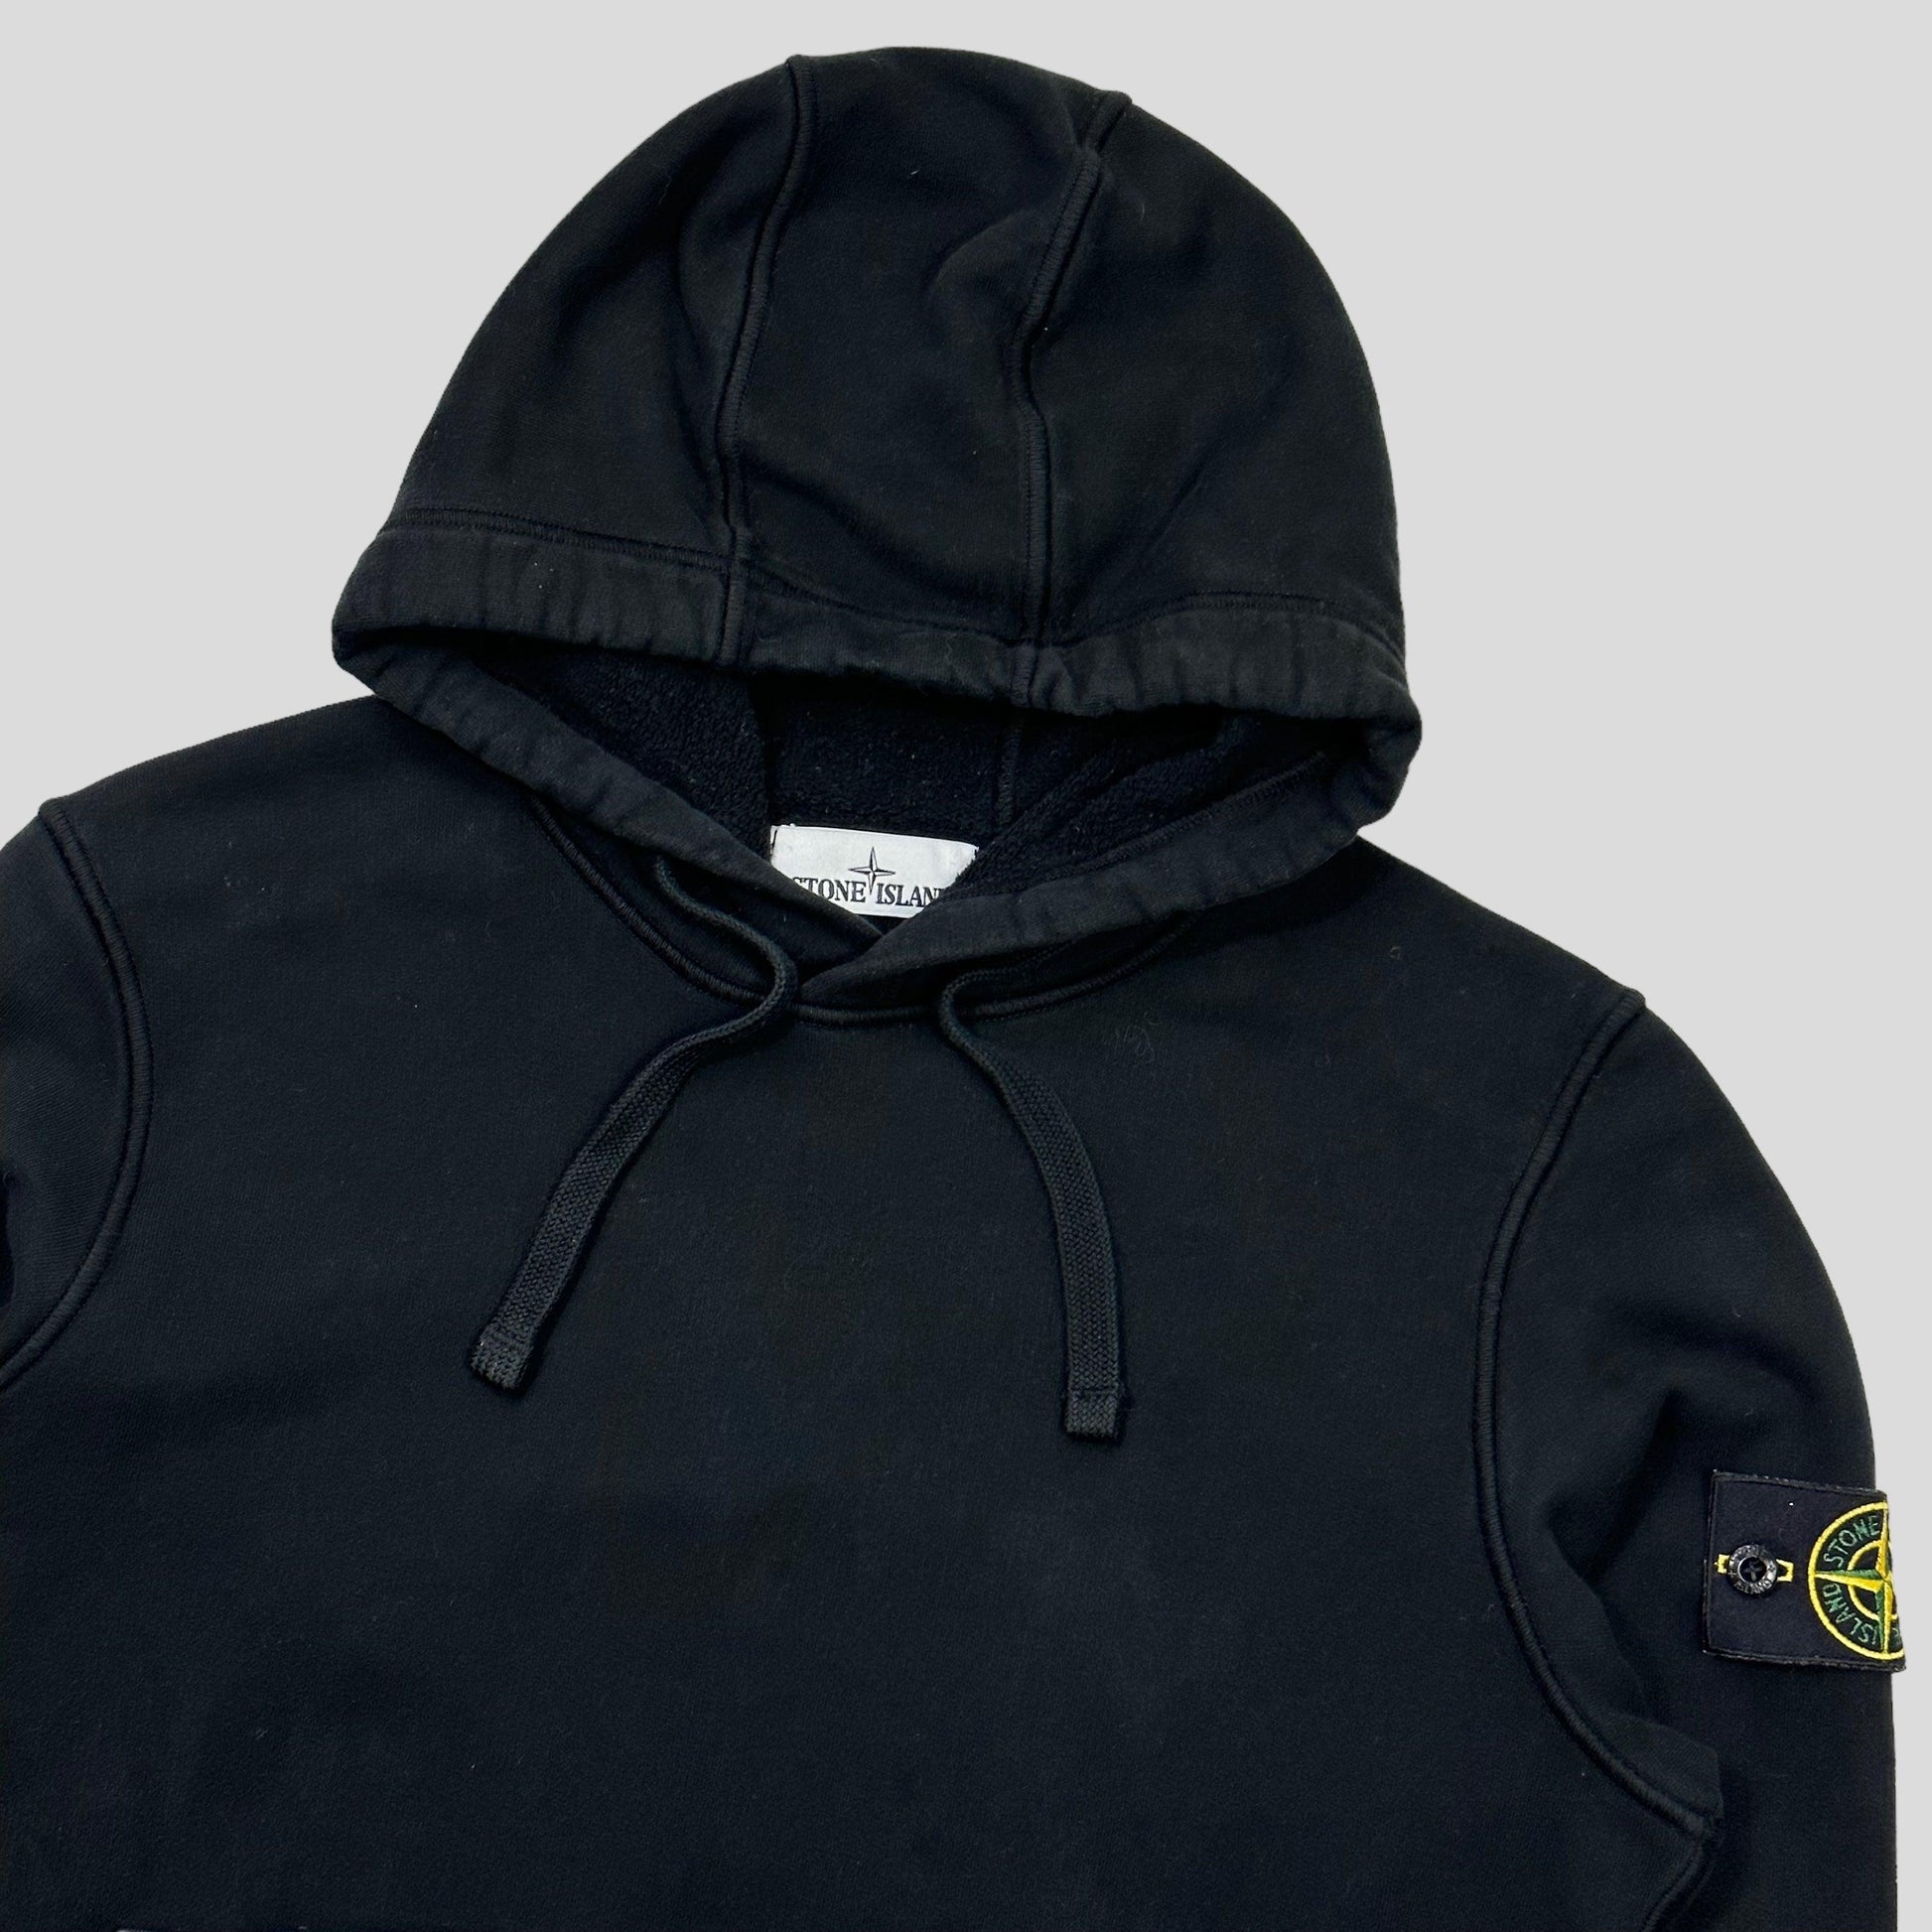 Stone Island AW20 Black Pullover Hoodie - S/M - Known Source